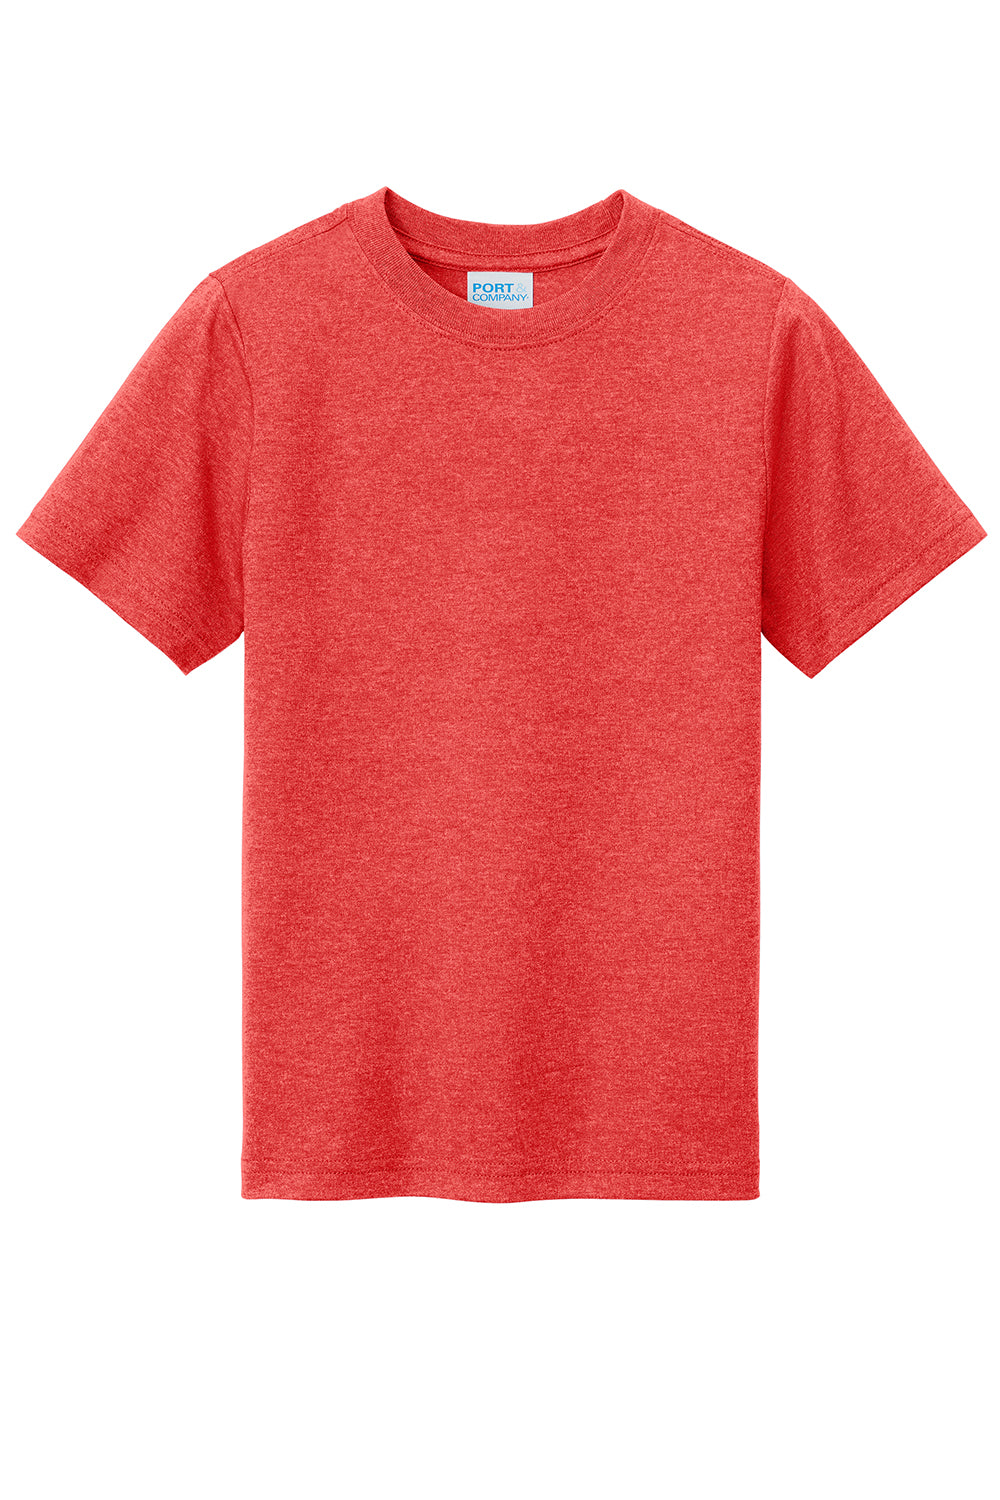 Port & Company PC330Y Youth Short Sleeve Crewneck T-Shirt Bright Heather Red Flat Front